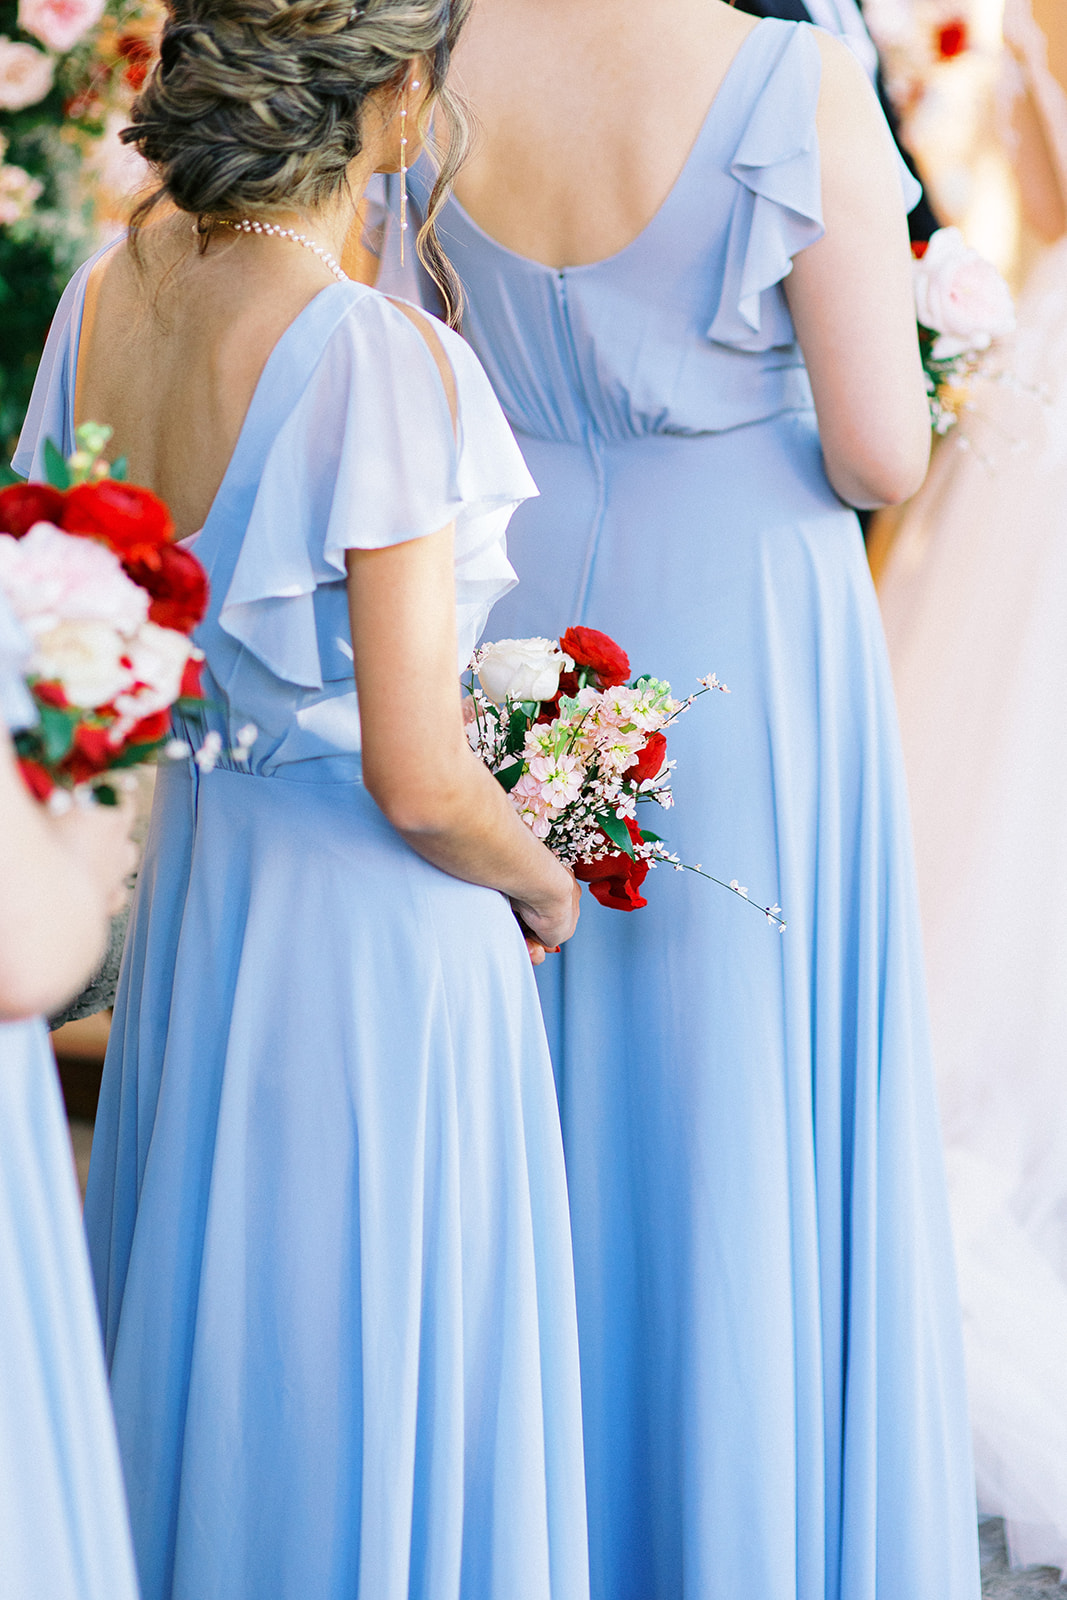 Backs of bridesmaids wearing light blue dresses facing towards bride at wedding ceremony, holding bouquets.